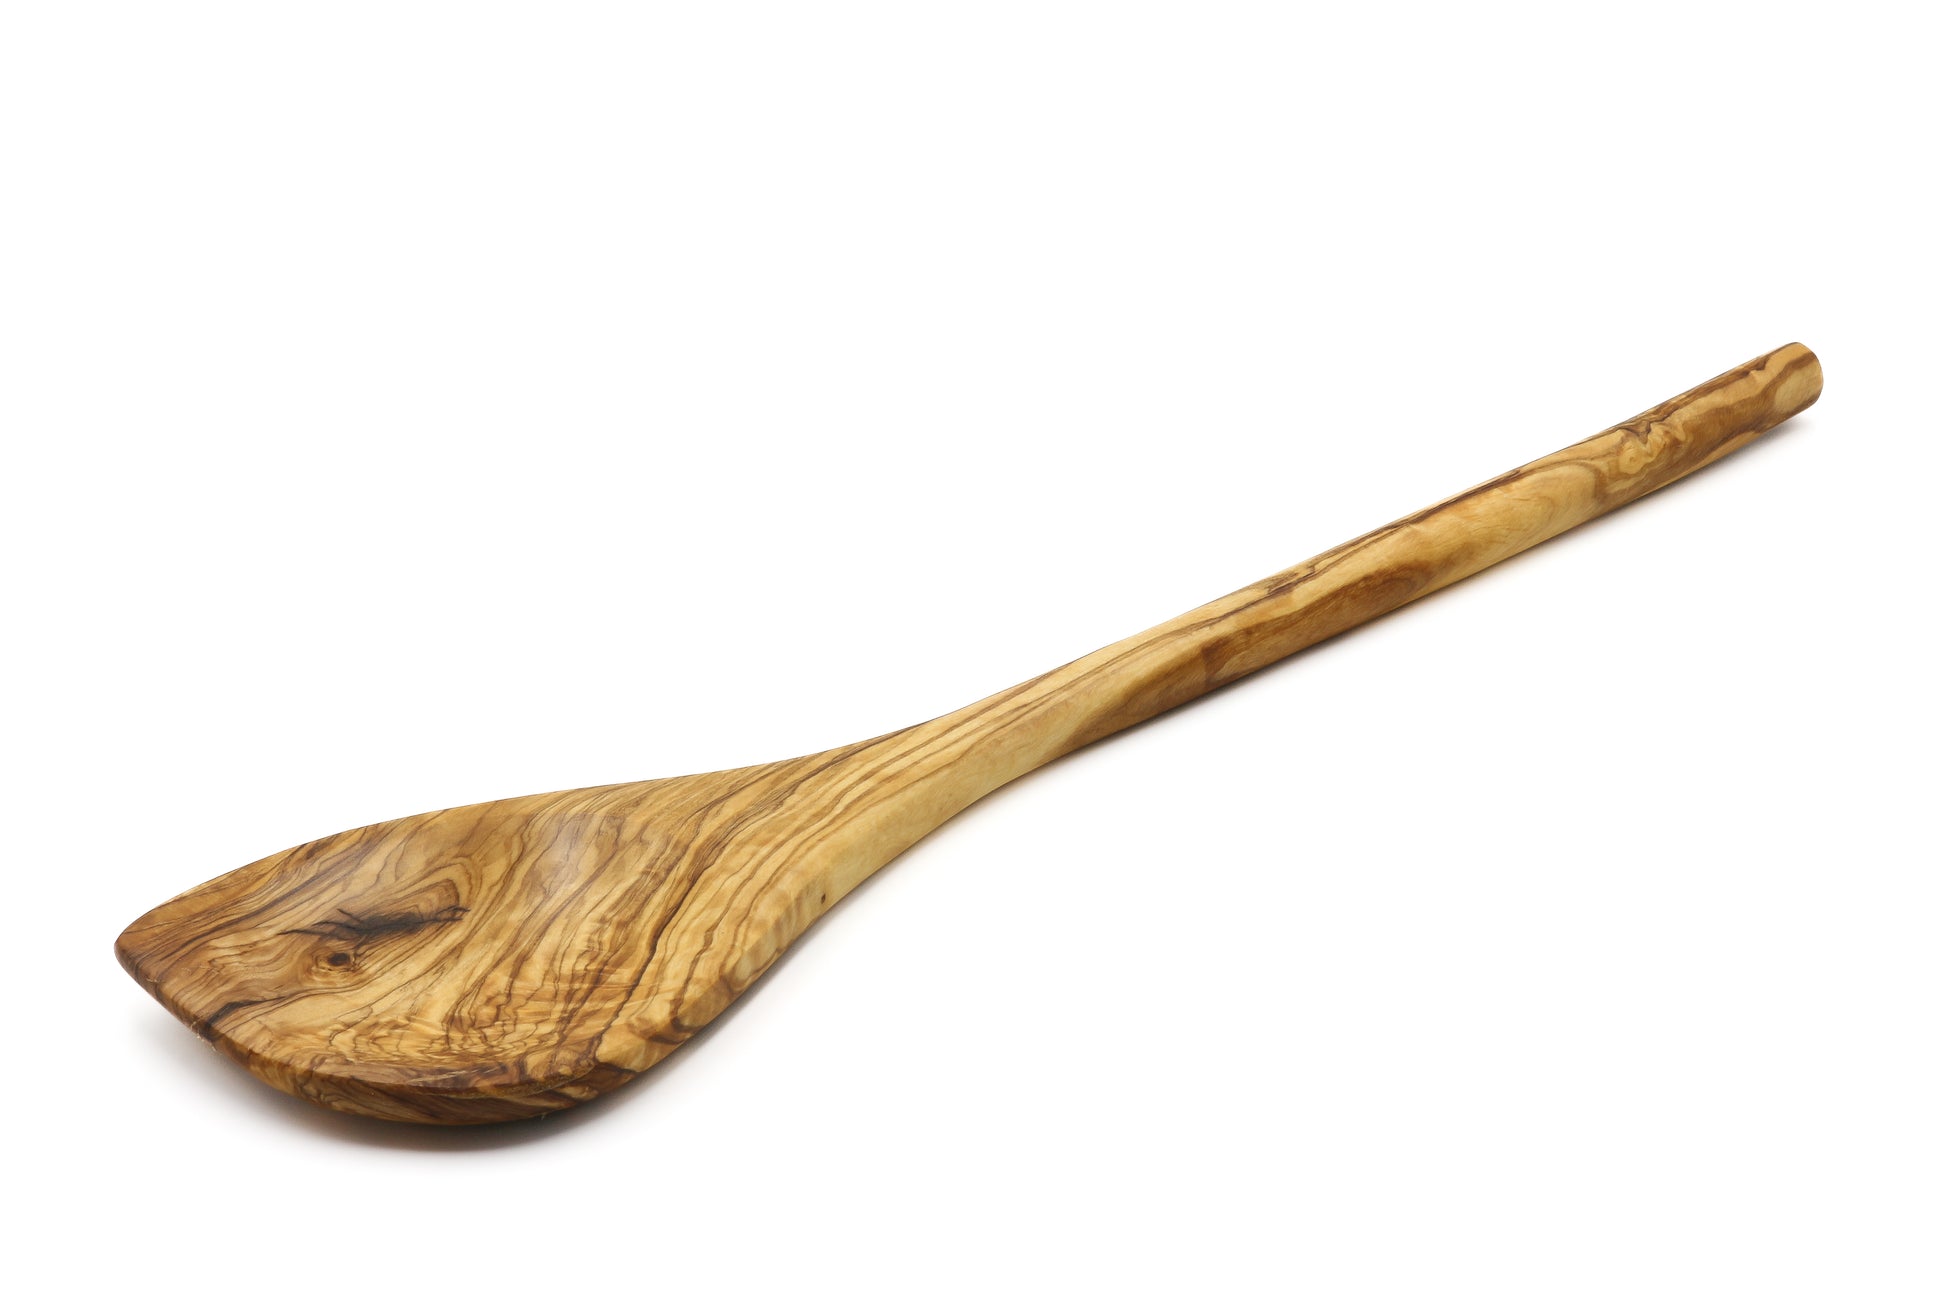 Versatile olive wood cooking tool for your kitchen